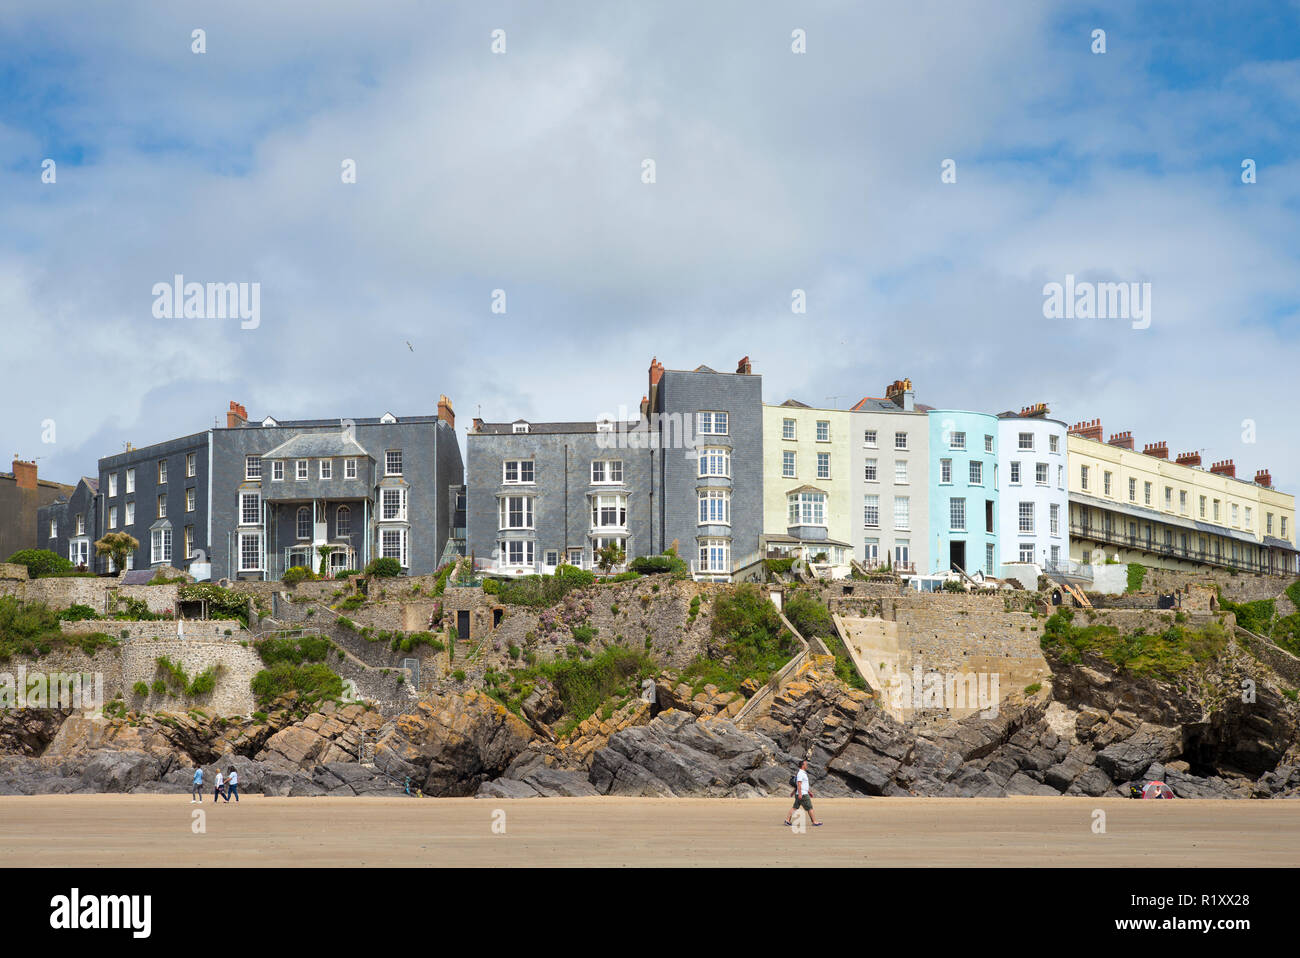 Esplanade - traditional brightly coloured seaside housing, hotels and tourist accommodation above clifftop in resort town of Tenby, Wales, UK Stock Photo